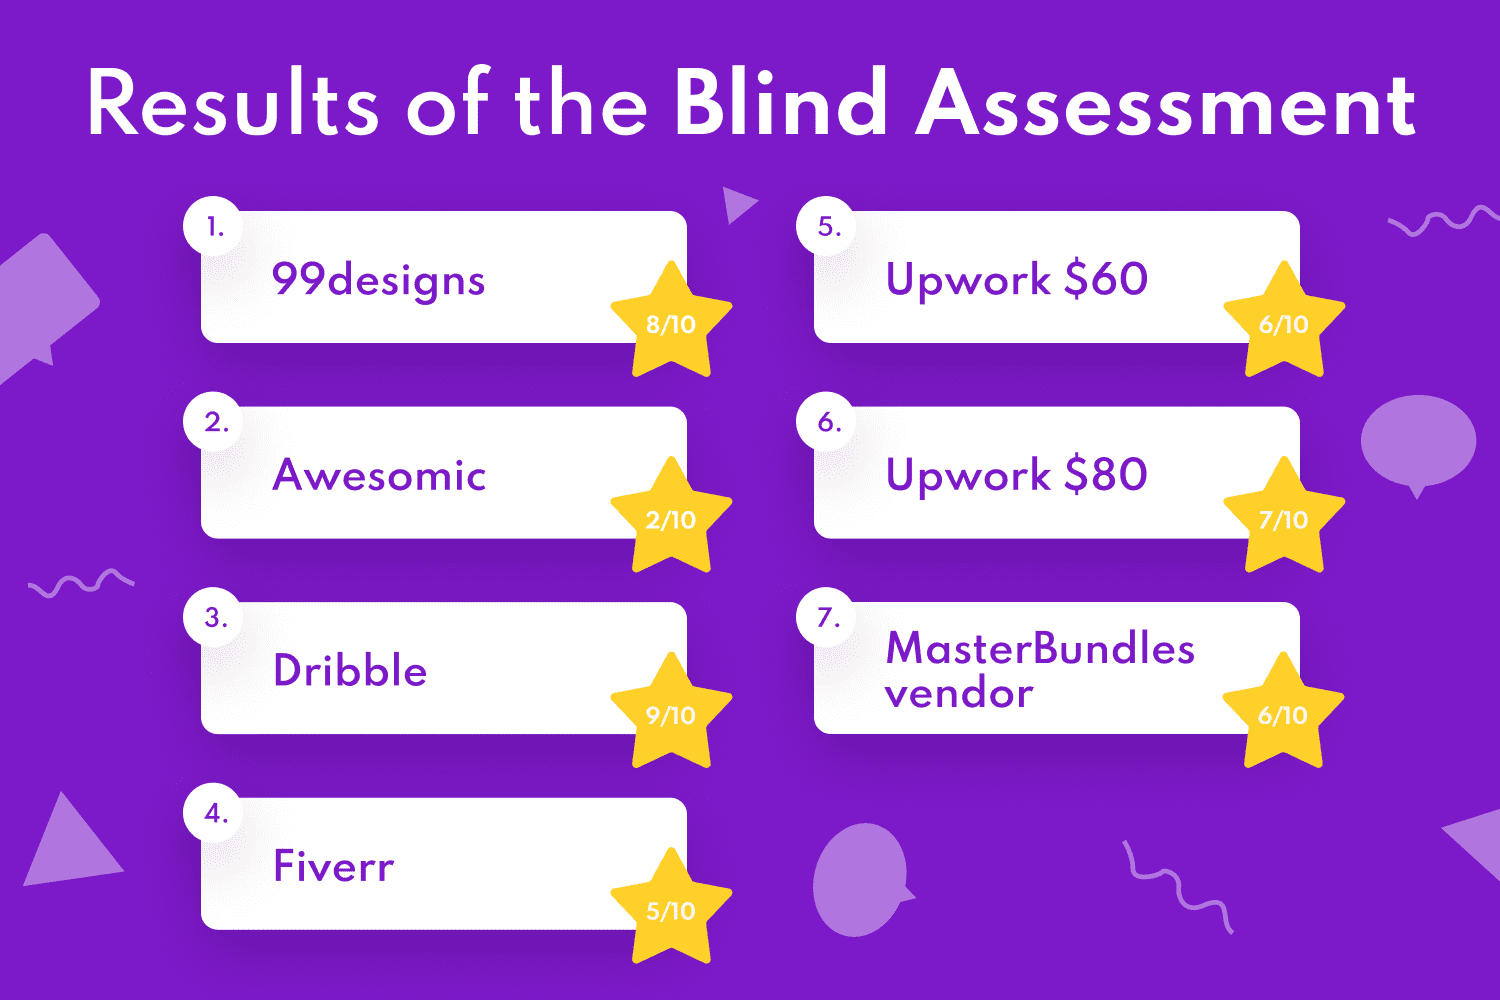 Results of the blind assessment.